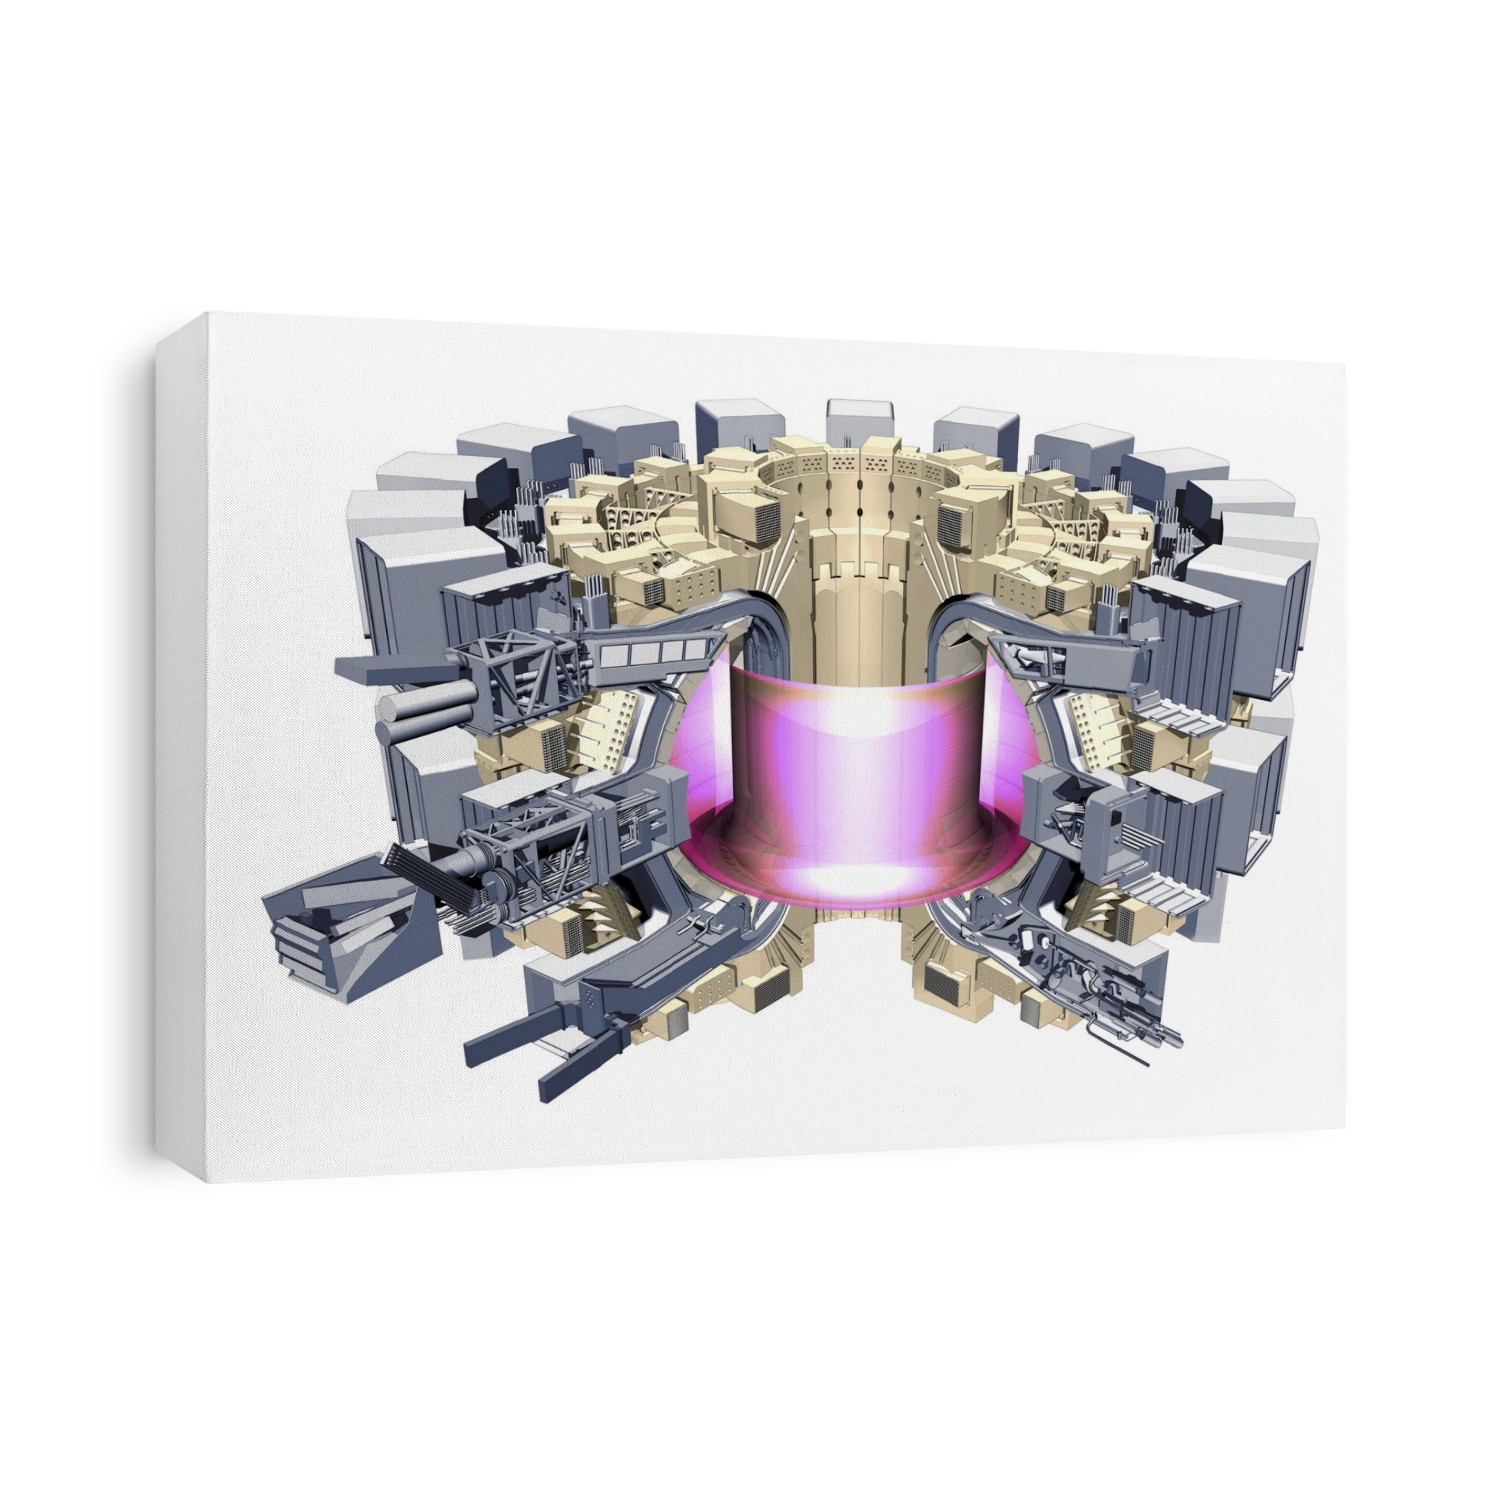 ITER fusion research reactor, computer illustration. ITER, the International Thermonuclear Experimental Reactor, is being designed to test the principles surrounding the generation of power from nuclear fusion, the energy source of stars. ITER comprises a toroidal (doughnut-shaped) chamber in which a plasma (pink) is contained by strong magnetic fields. A plasma is an ionised gas, and its ionisation makes it susceptible to electromagnetic fields. By magnetically compressing and igniting a plasma inside ITER, researchers hope to be able to study the best way of using it to generate electricity. Reactions are due to begin in 2016.